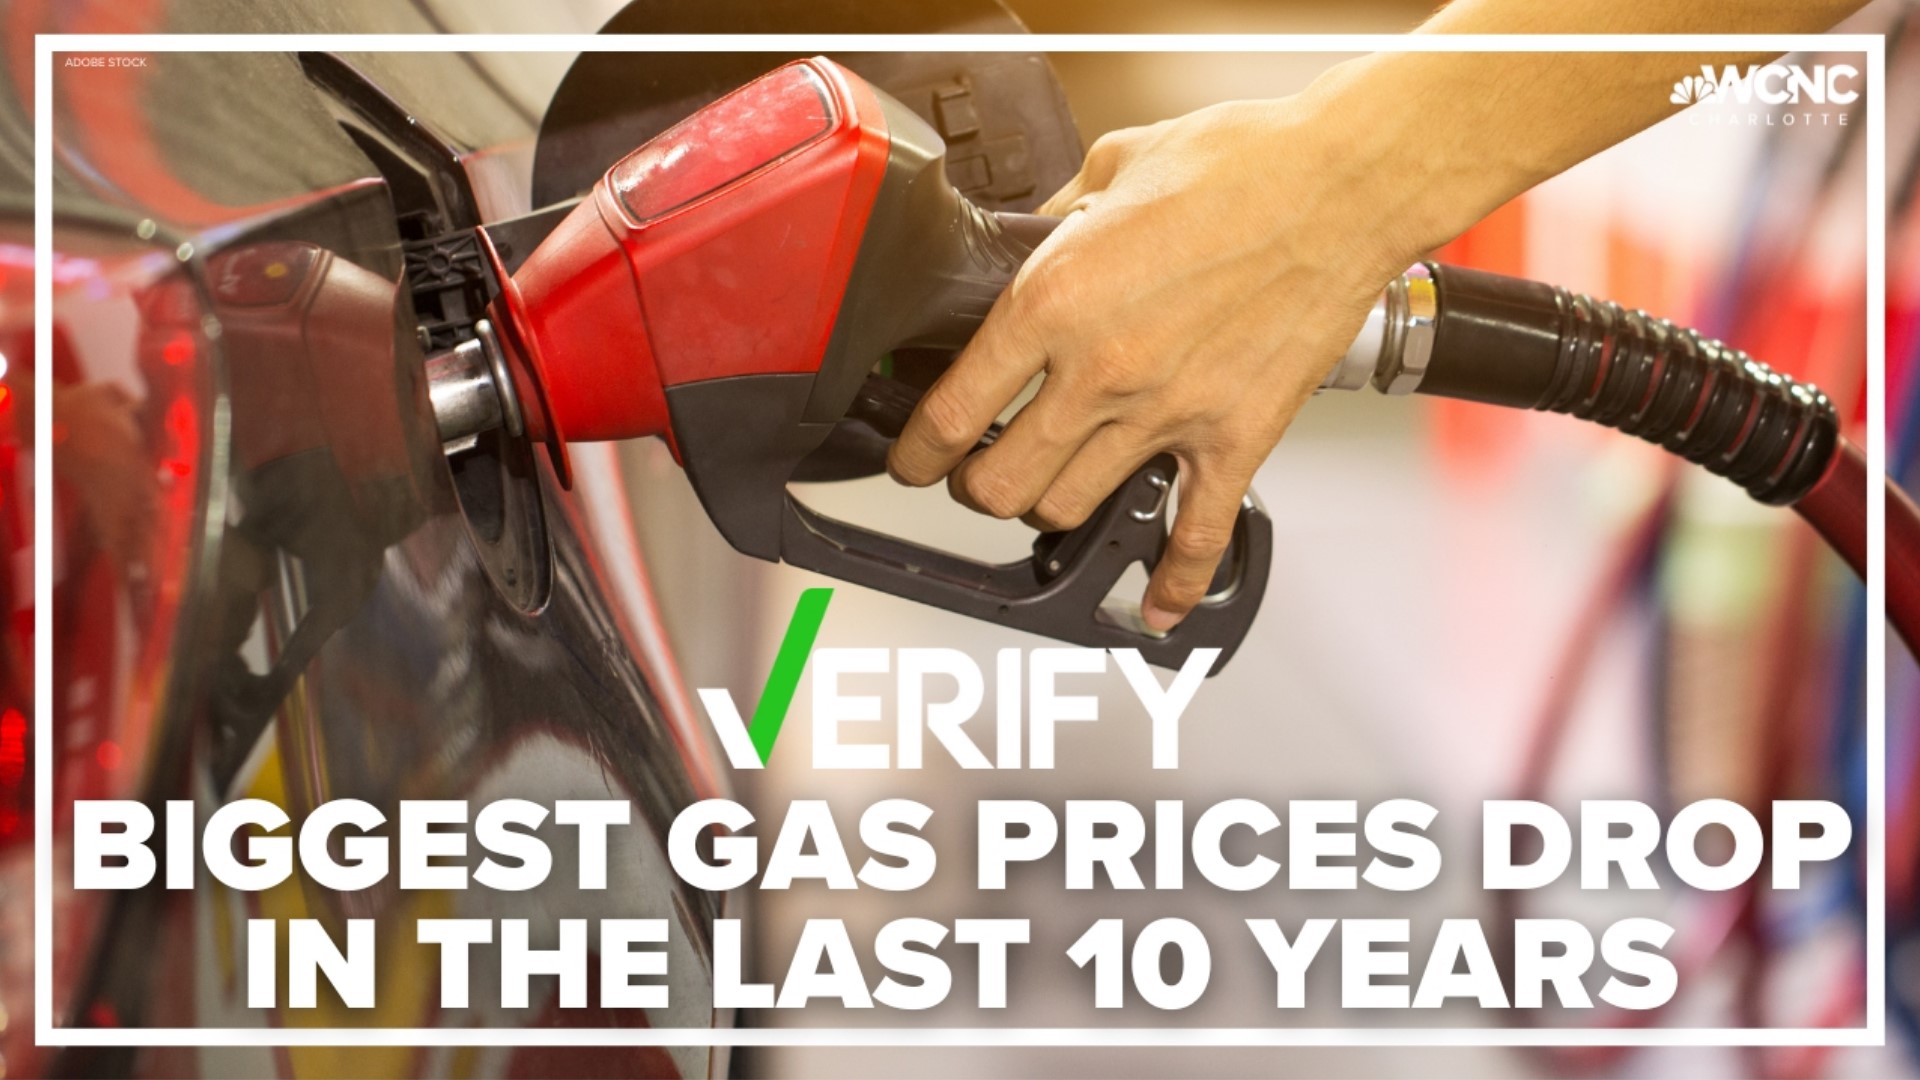 For the first time in months, the national average price for a gallon of unleaded gas is below $4.